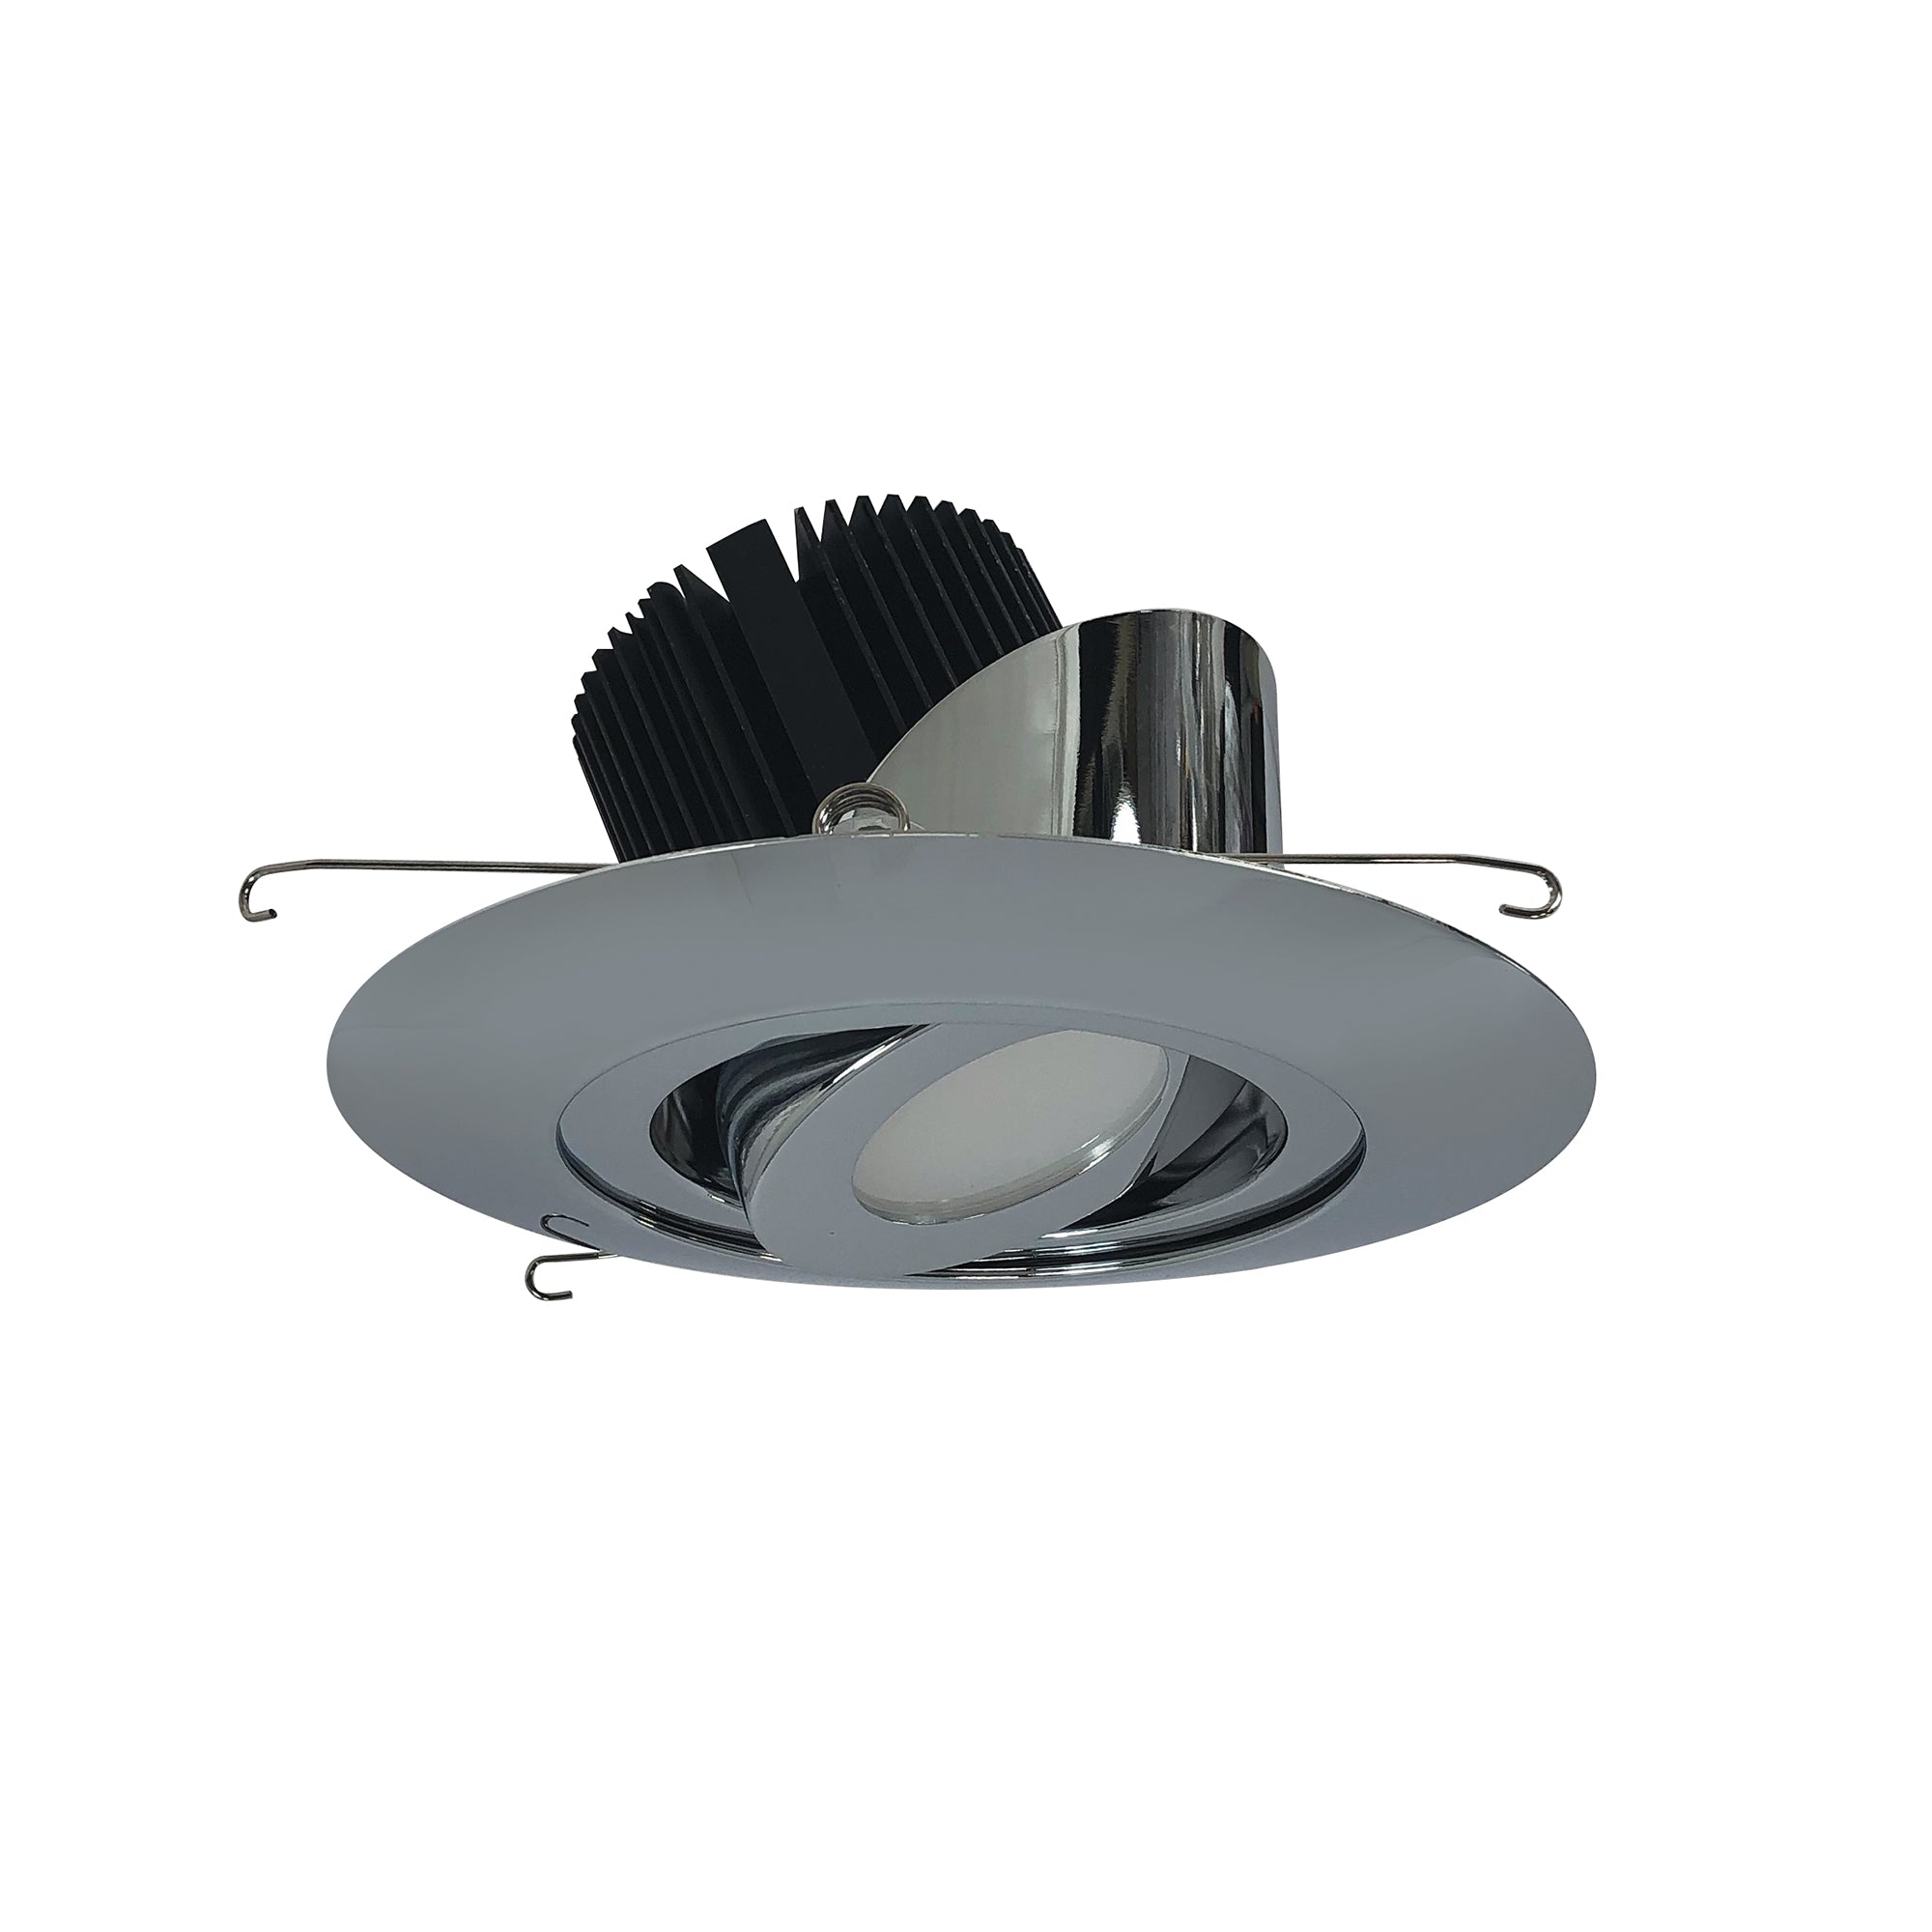 Nora Lighting NRM2-614L2530FC - Recessed - 6 Inch Marquise II Round Surface Adjustable Trim, Flood, 2500lm, 3000K, Chrome (Not Compatible with NHRM2-625 Housings)